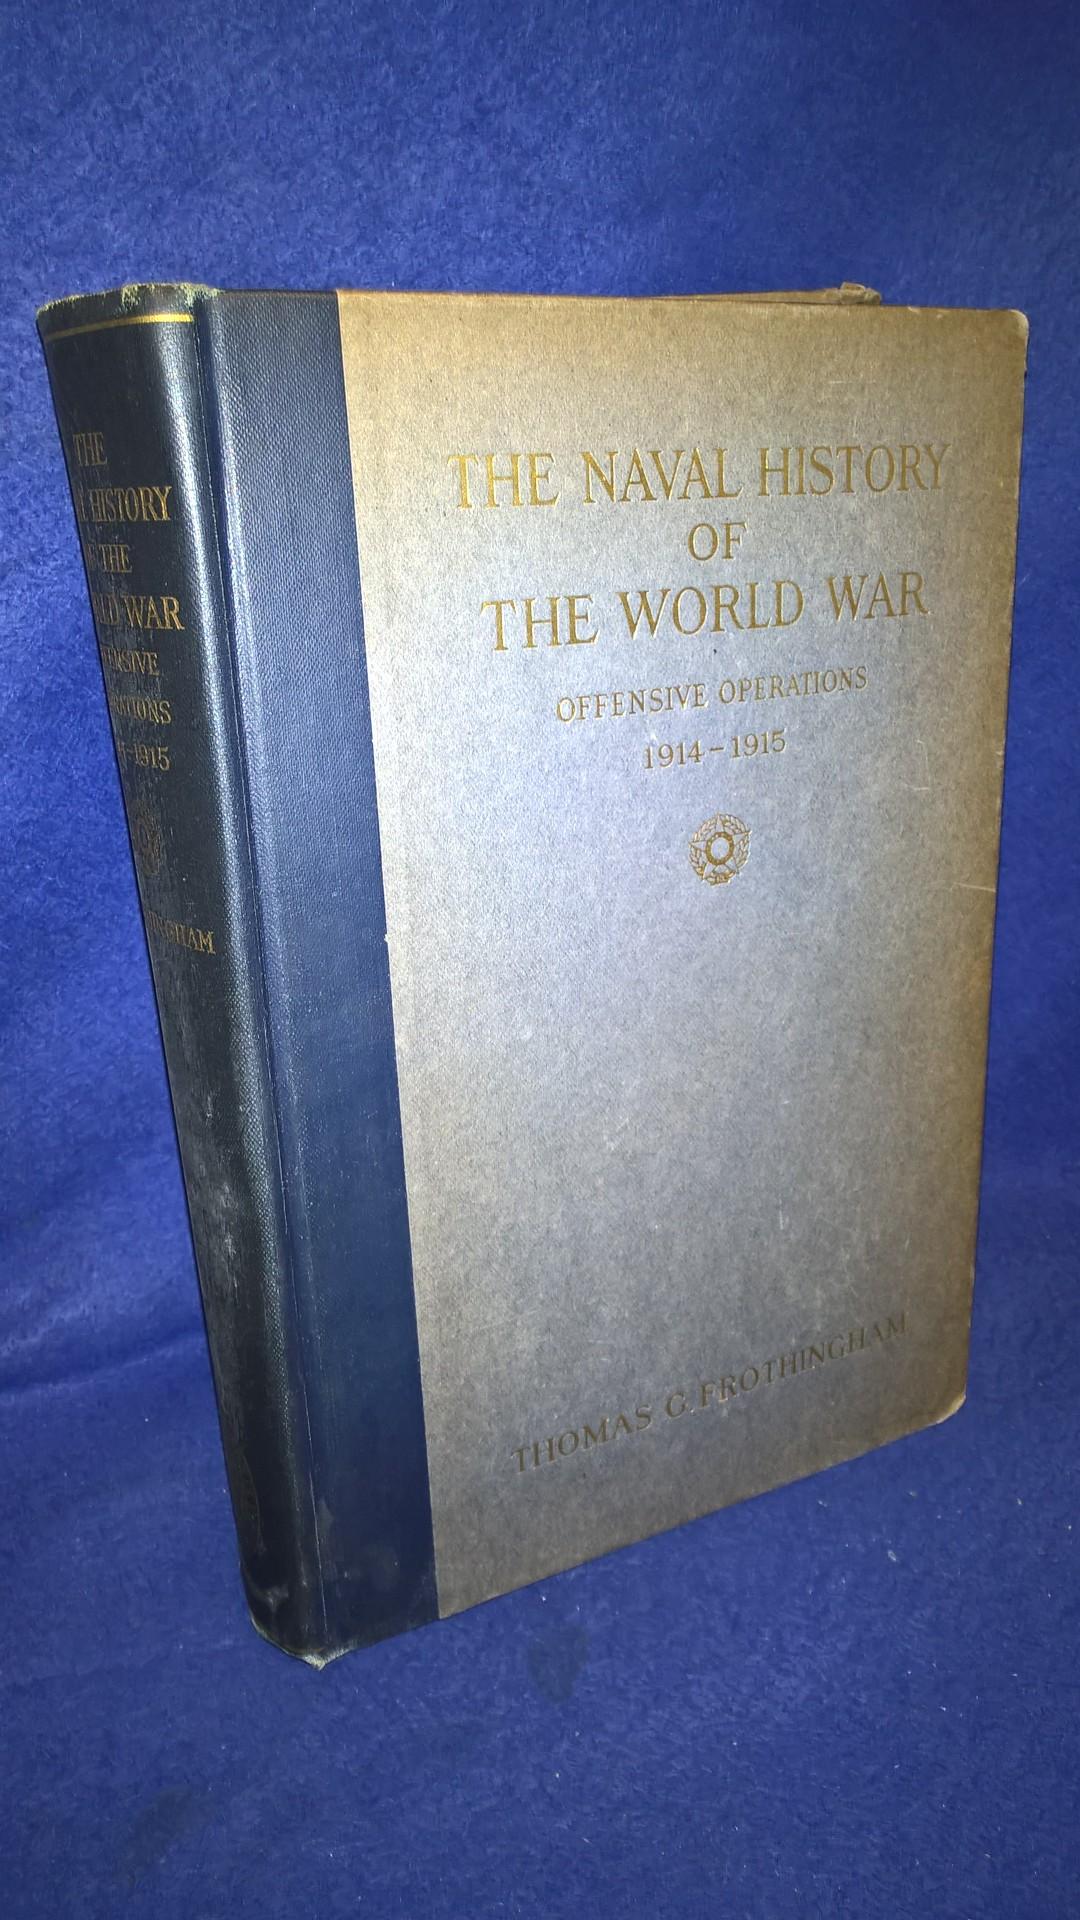 The Naval History of the World War: Offensive Operations 1914-1915.